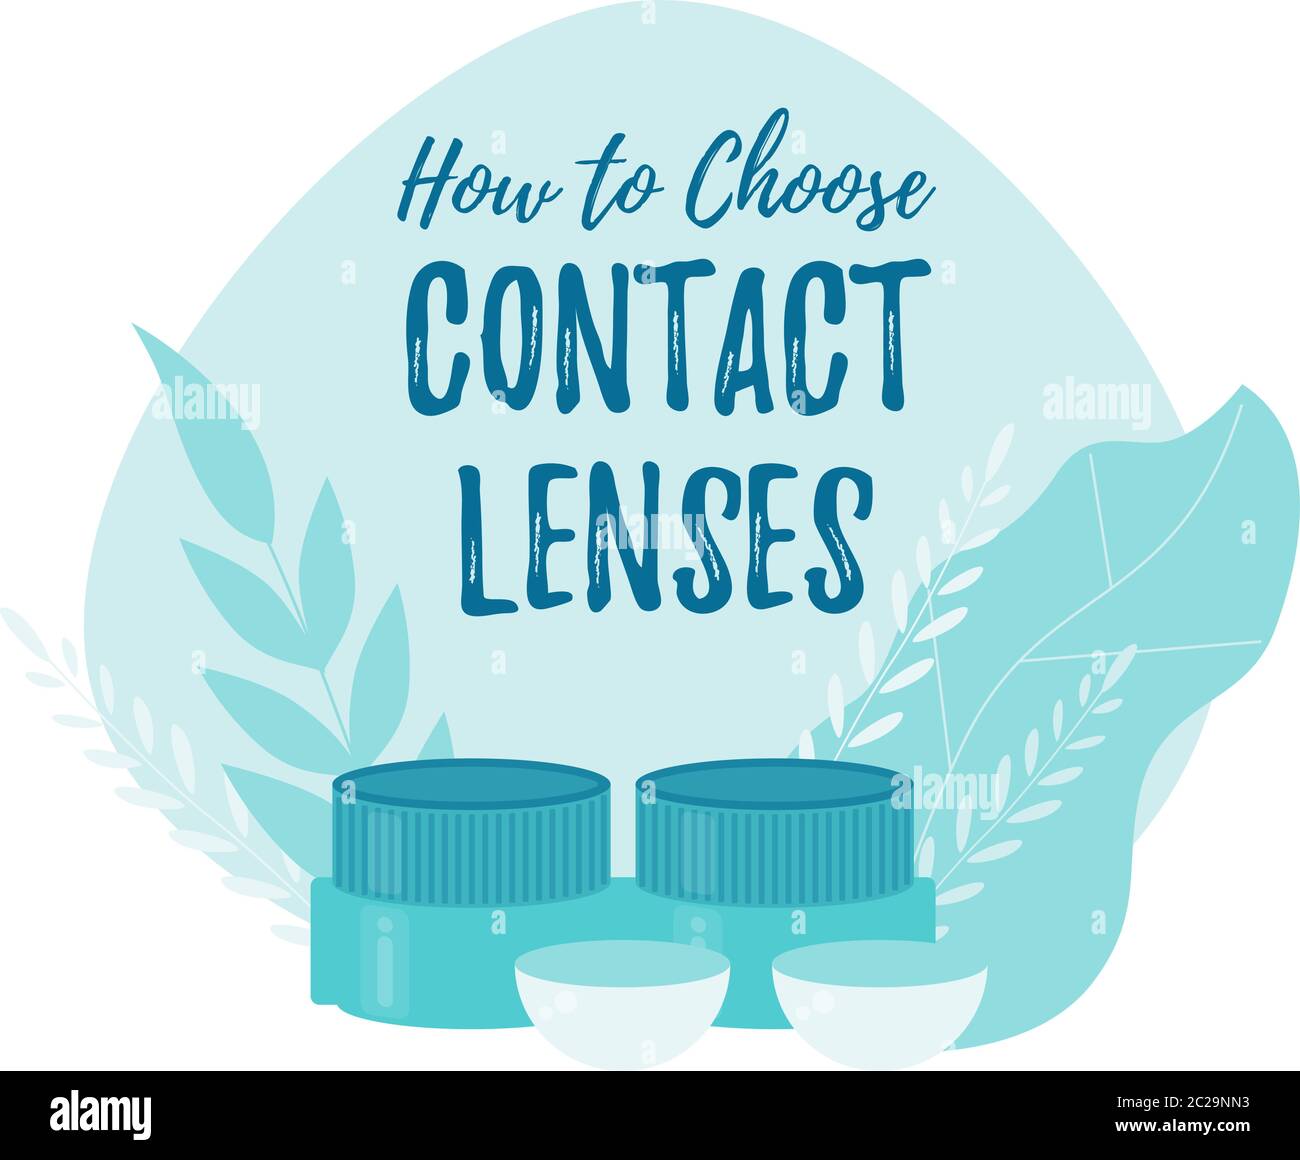 How to choose contact lenses. Concept with Contact Lens Case Box Holder. Stock Vector